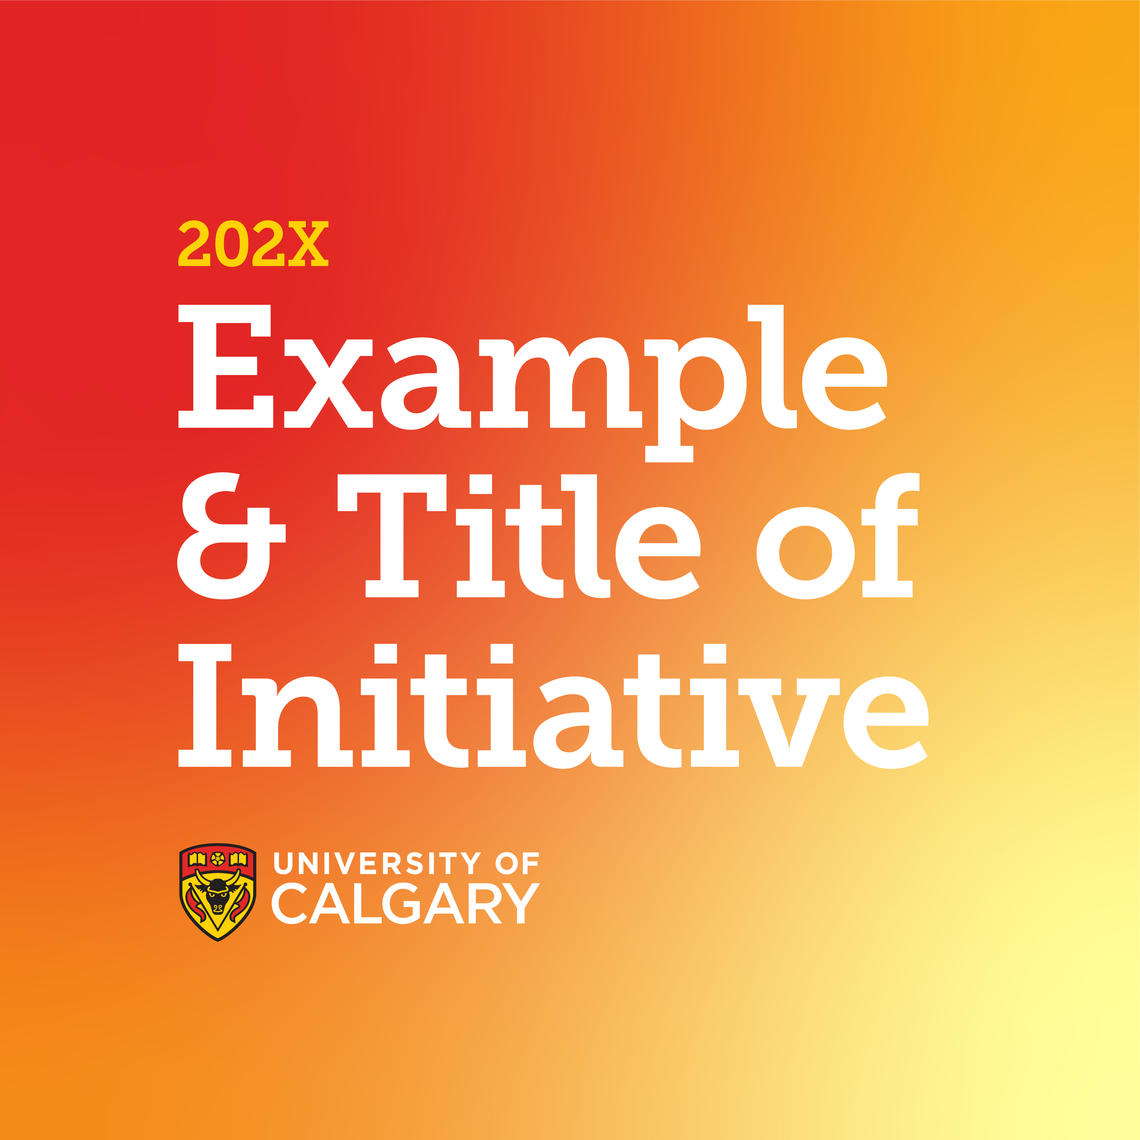 Example of using the UCalgary logo with a project or unit title